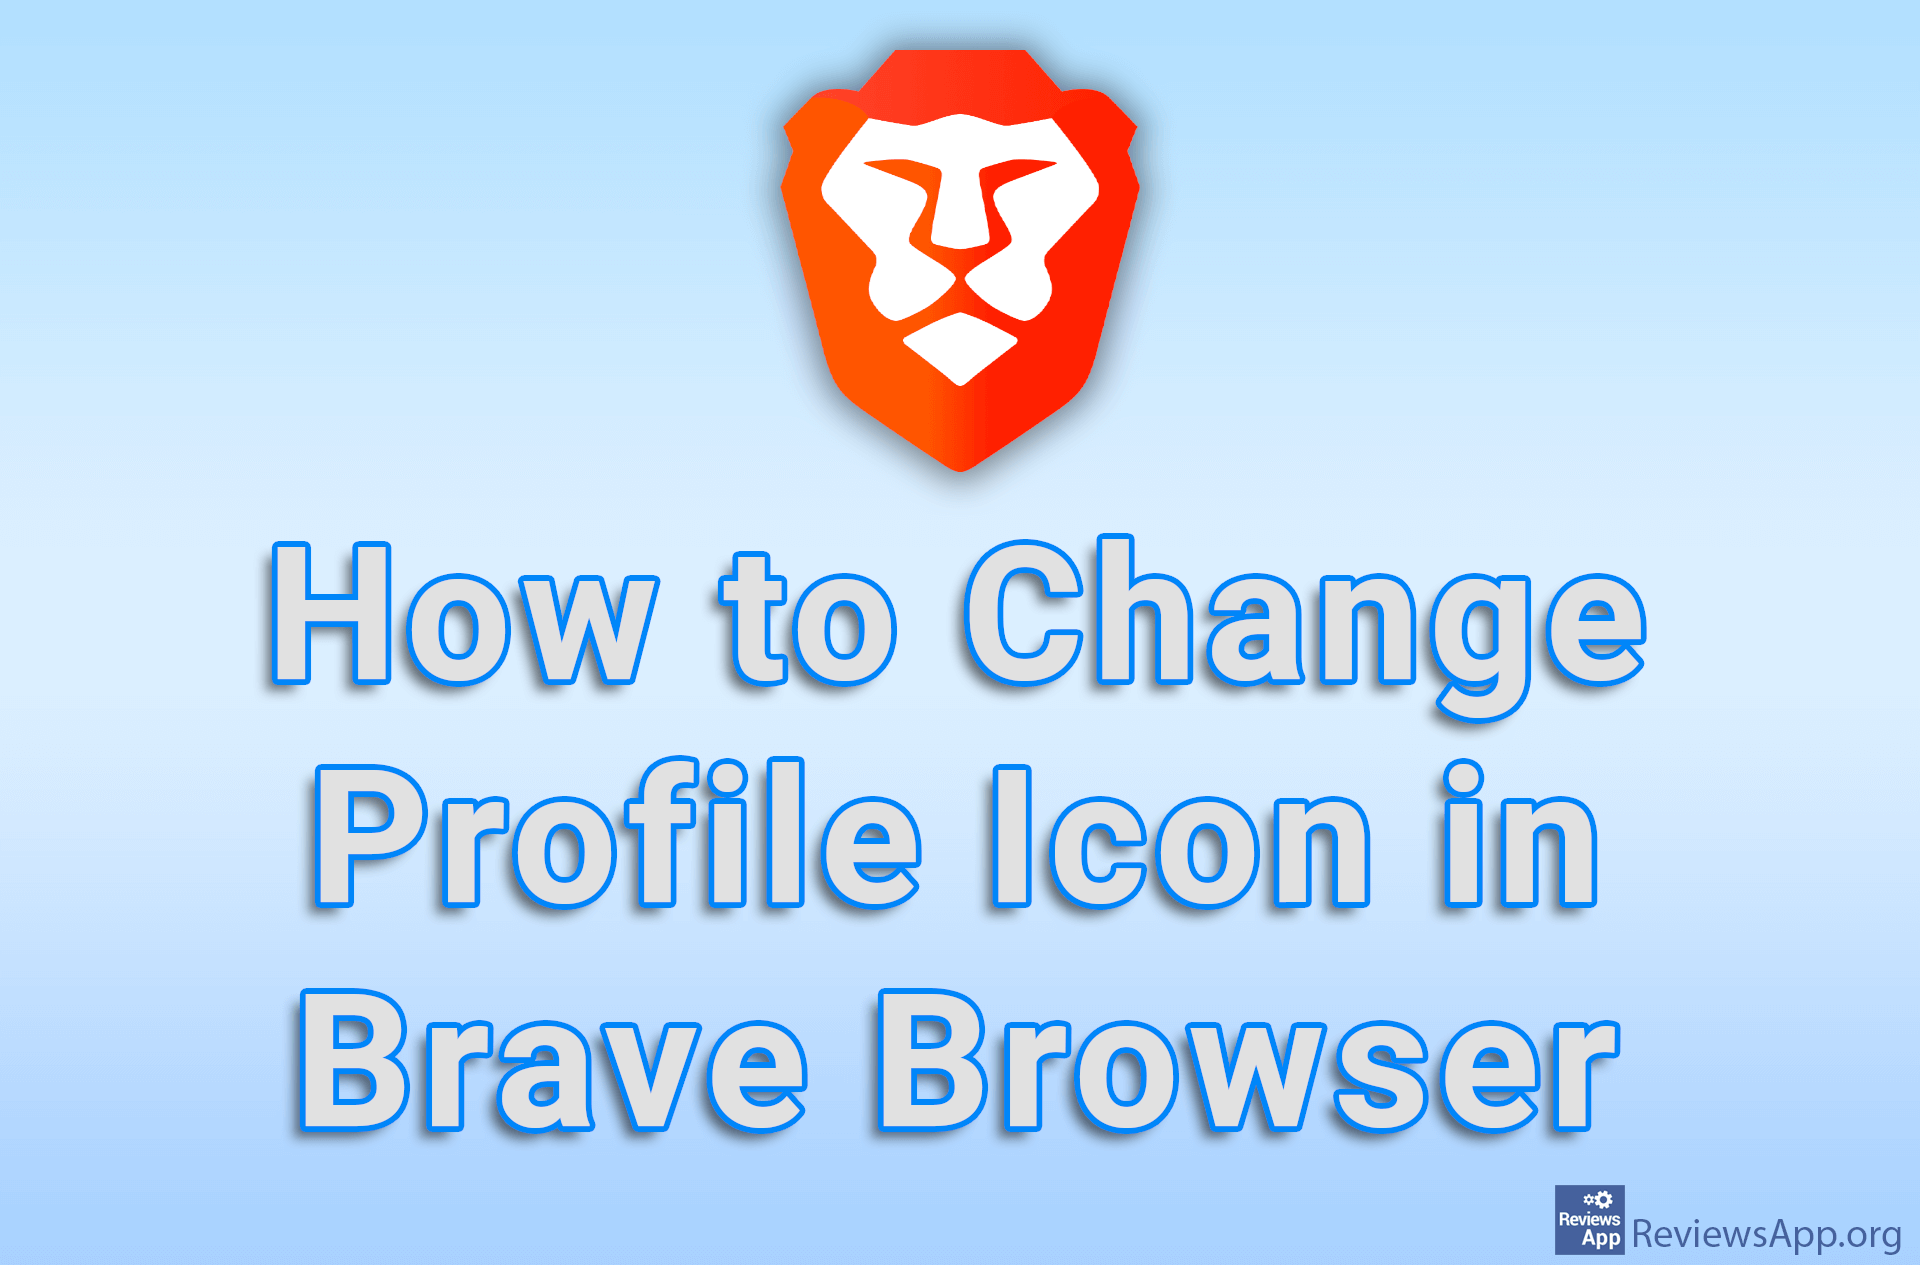 How to Change Profile Icon in Brave Browser